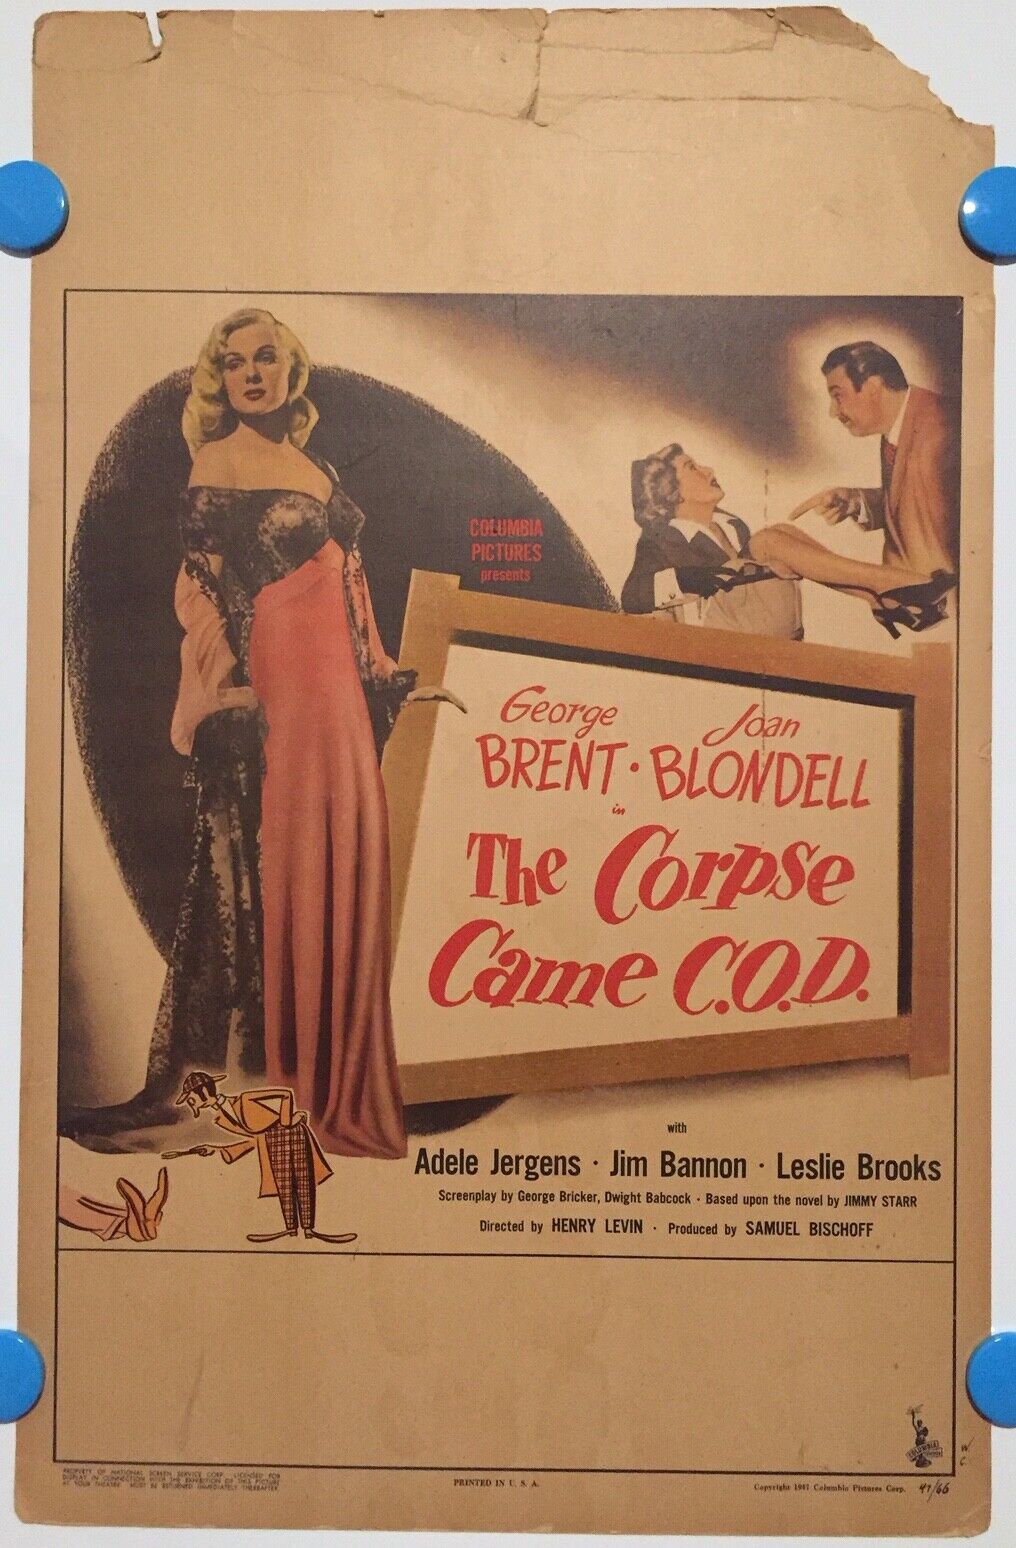 The Corpse Came C.o.d. - Beautiful 1947 Window Card - Dead Body Crime Comedy!!